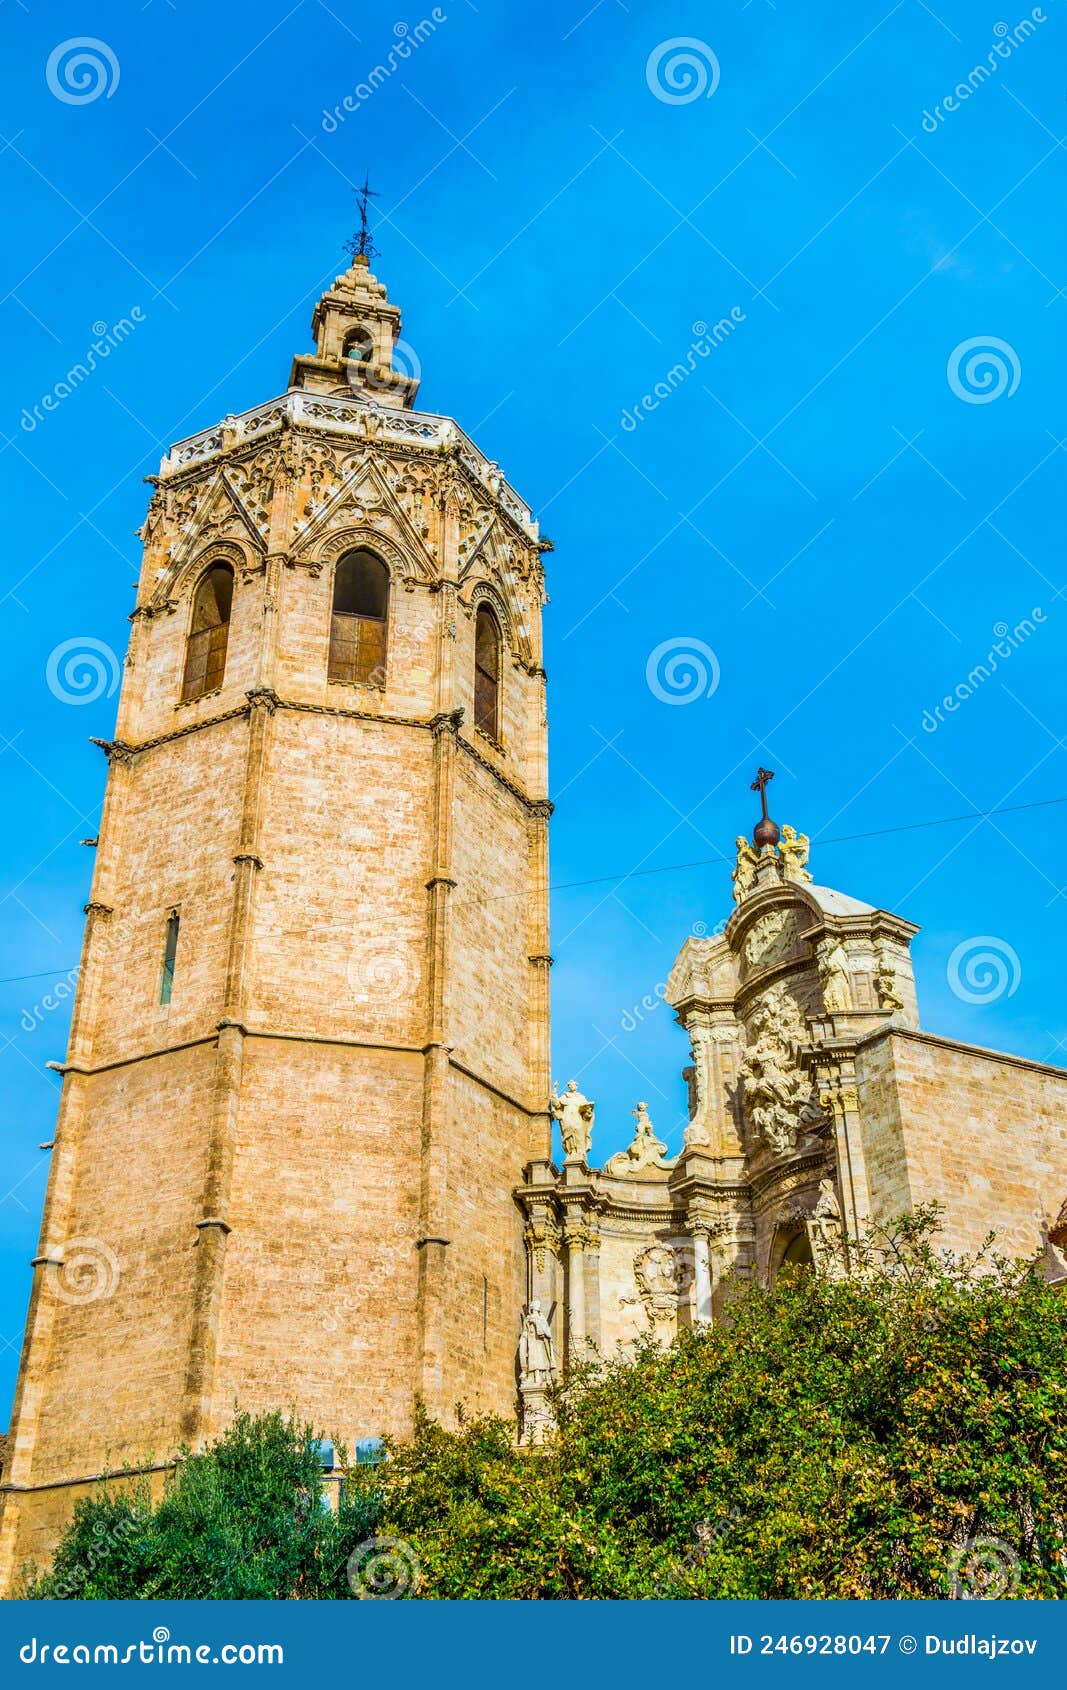 puerta de los hierros - part of the metropolitan cathedral-basilica of the assumption of our lady of valencia...image